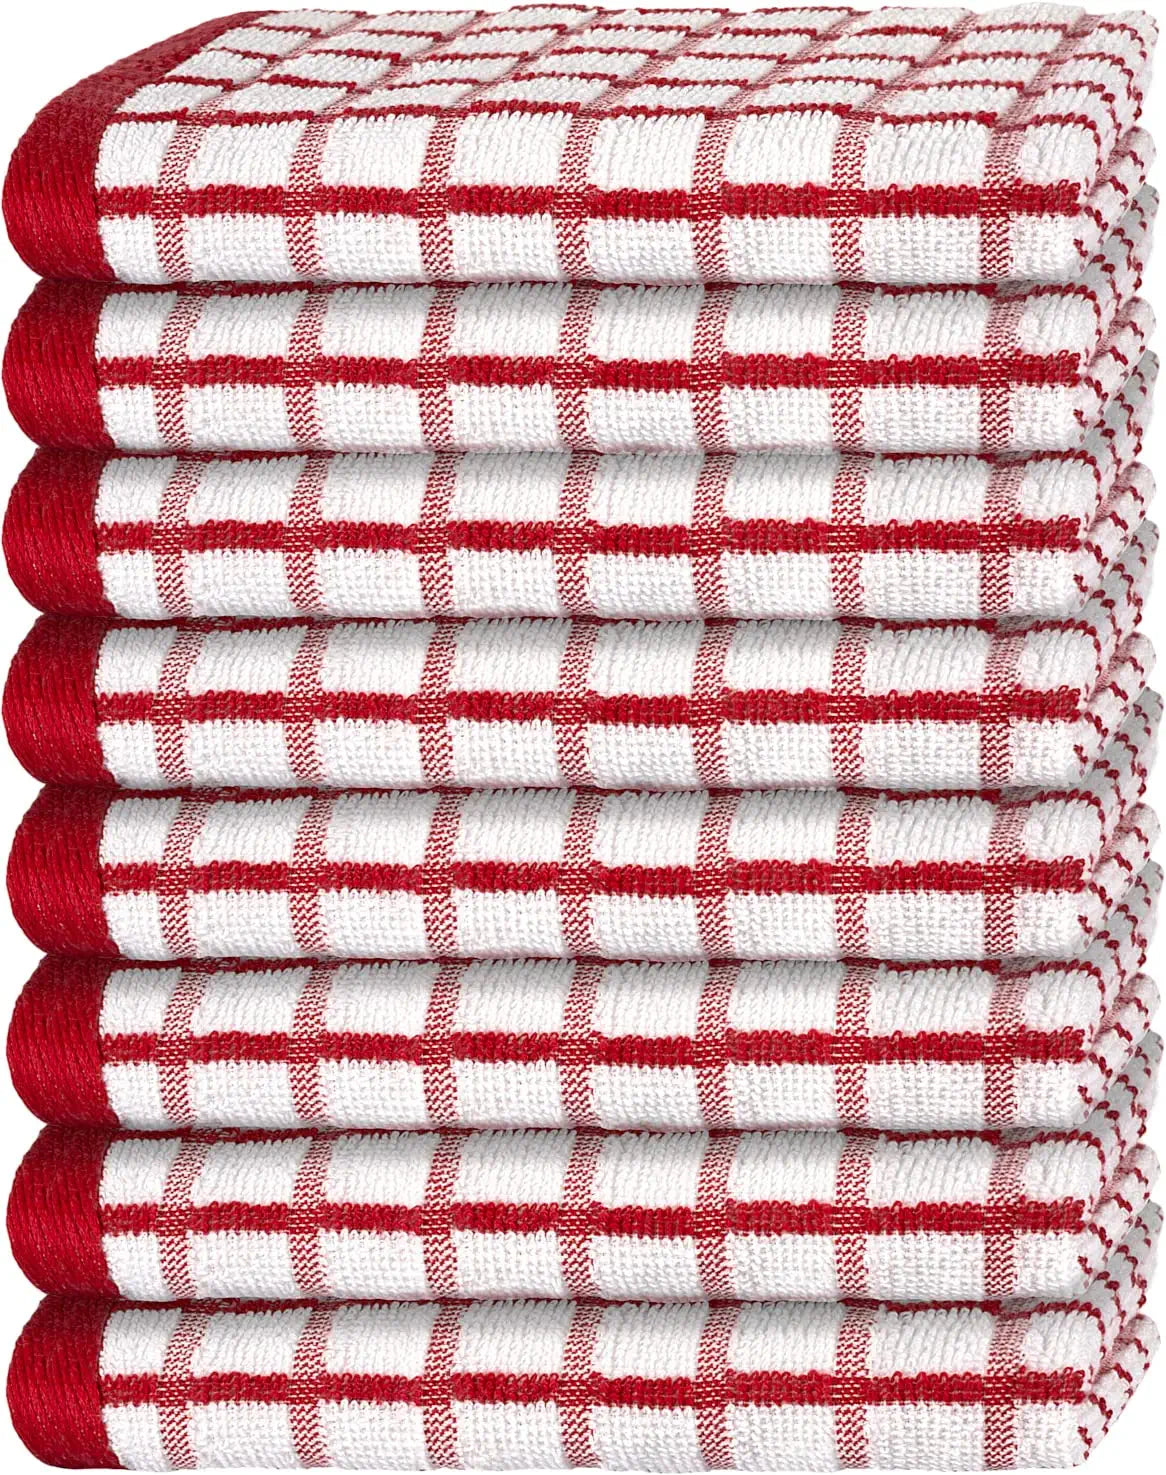 terry cloth dish towels